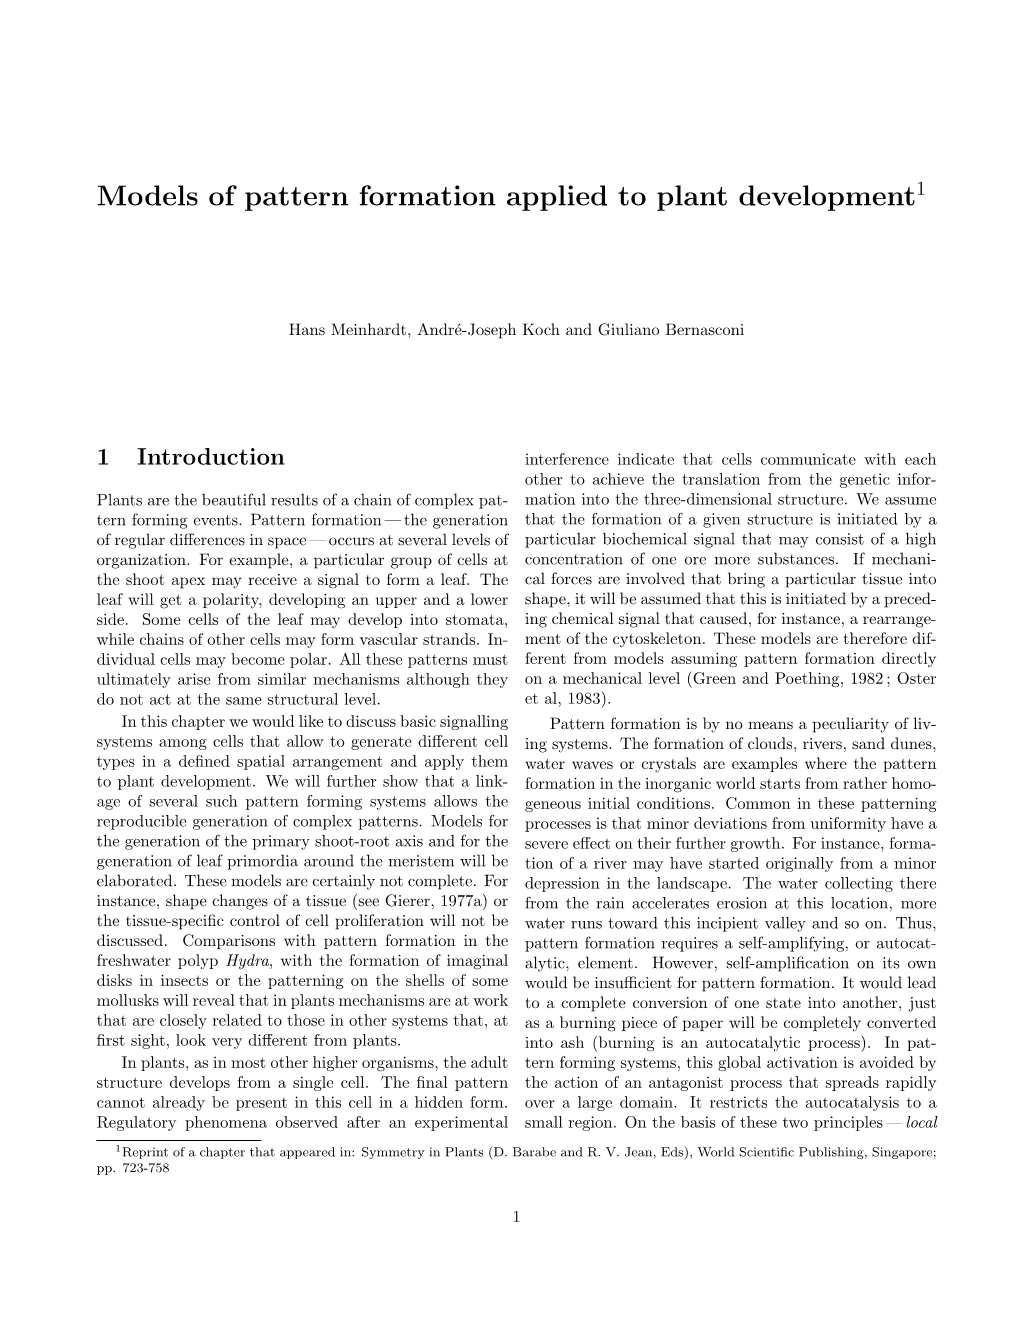 Models of Pattern Formation Applied to Plant Development1